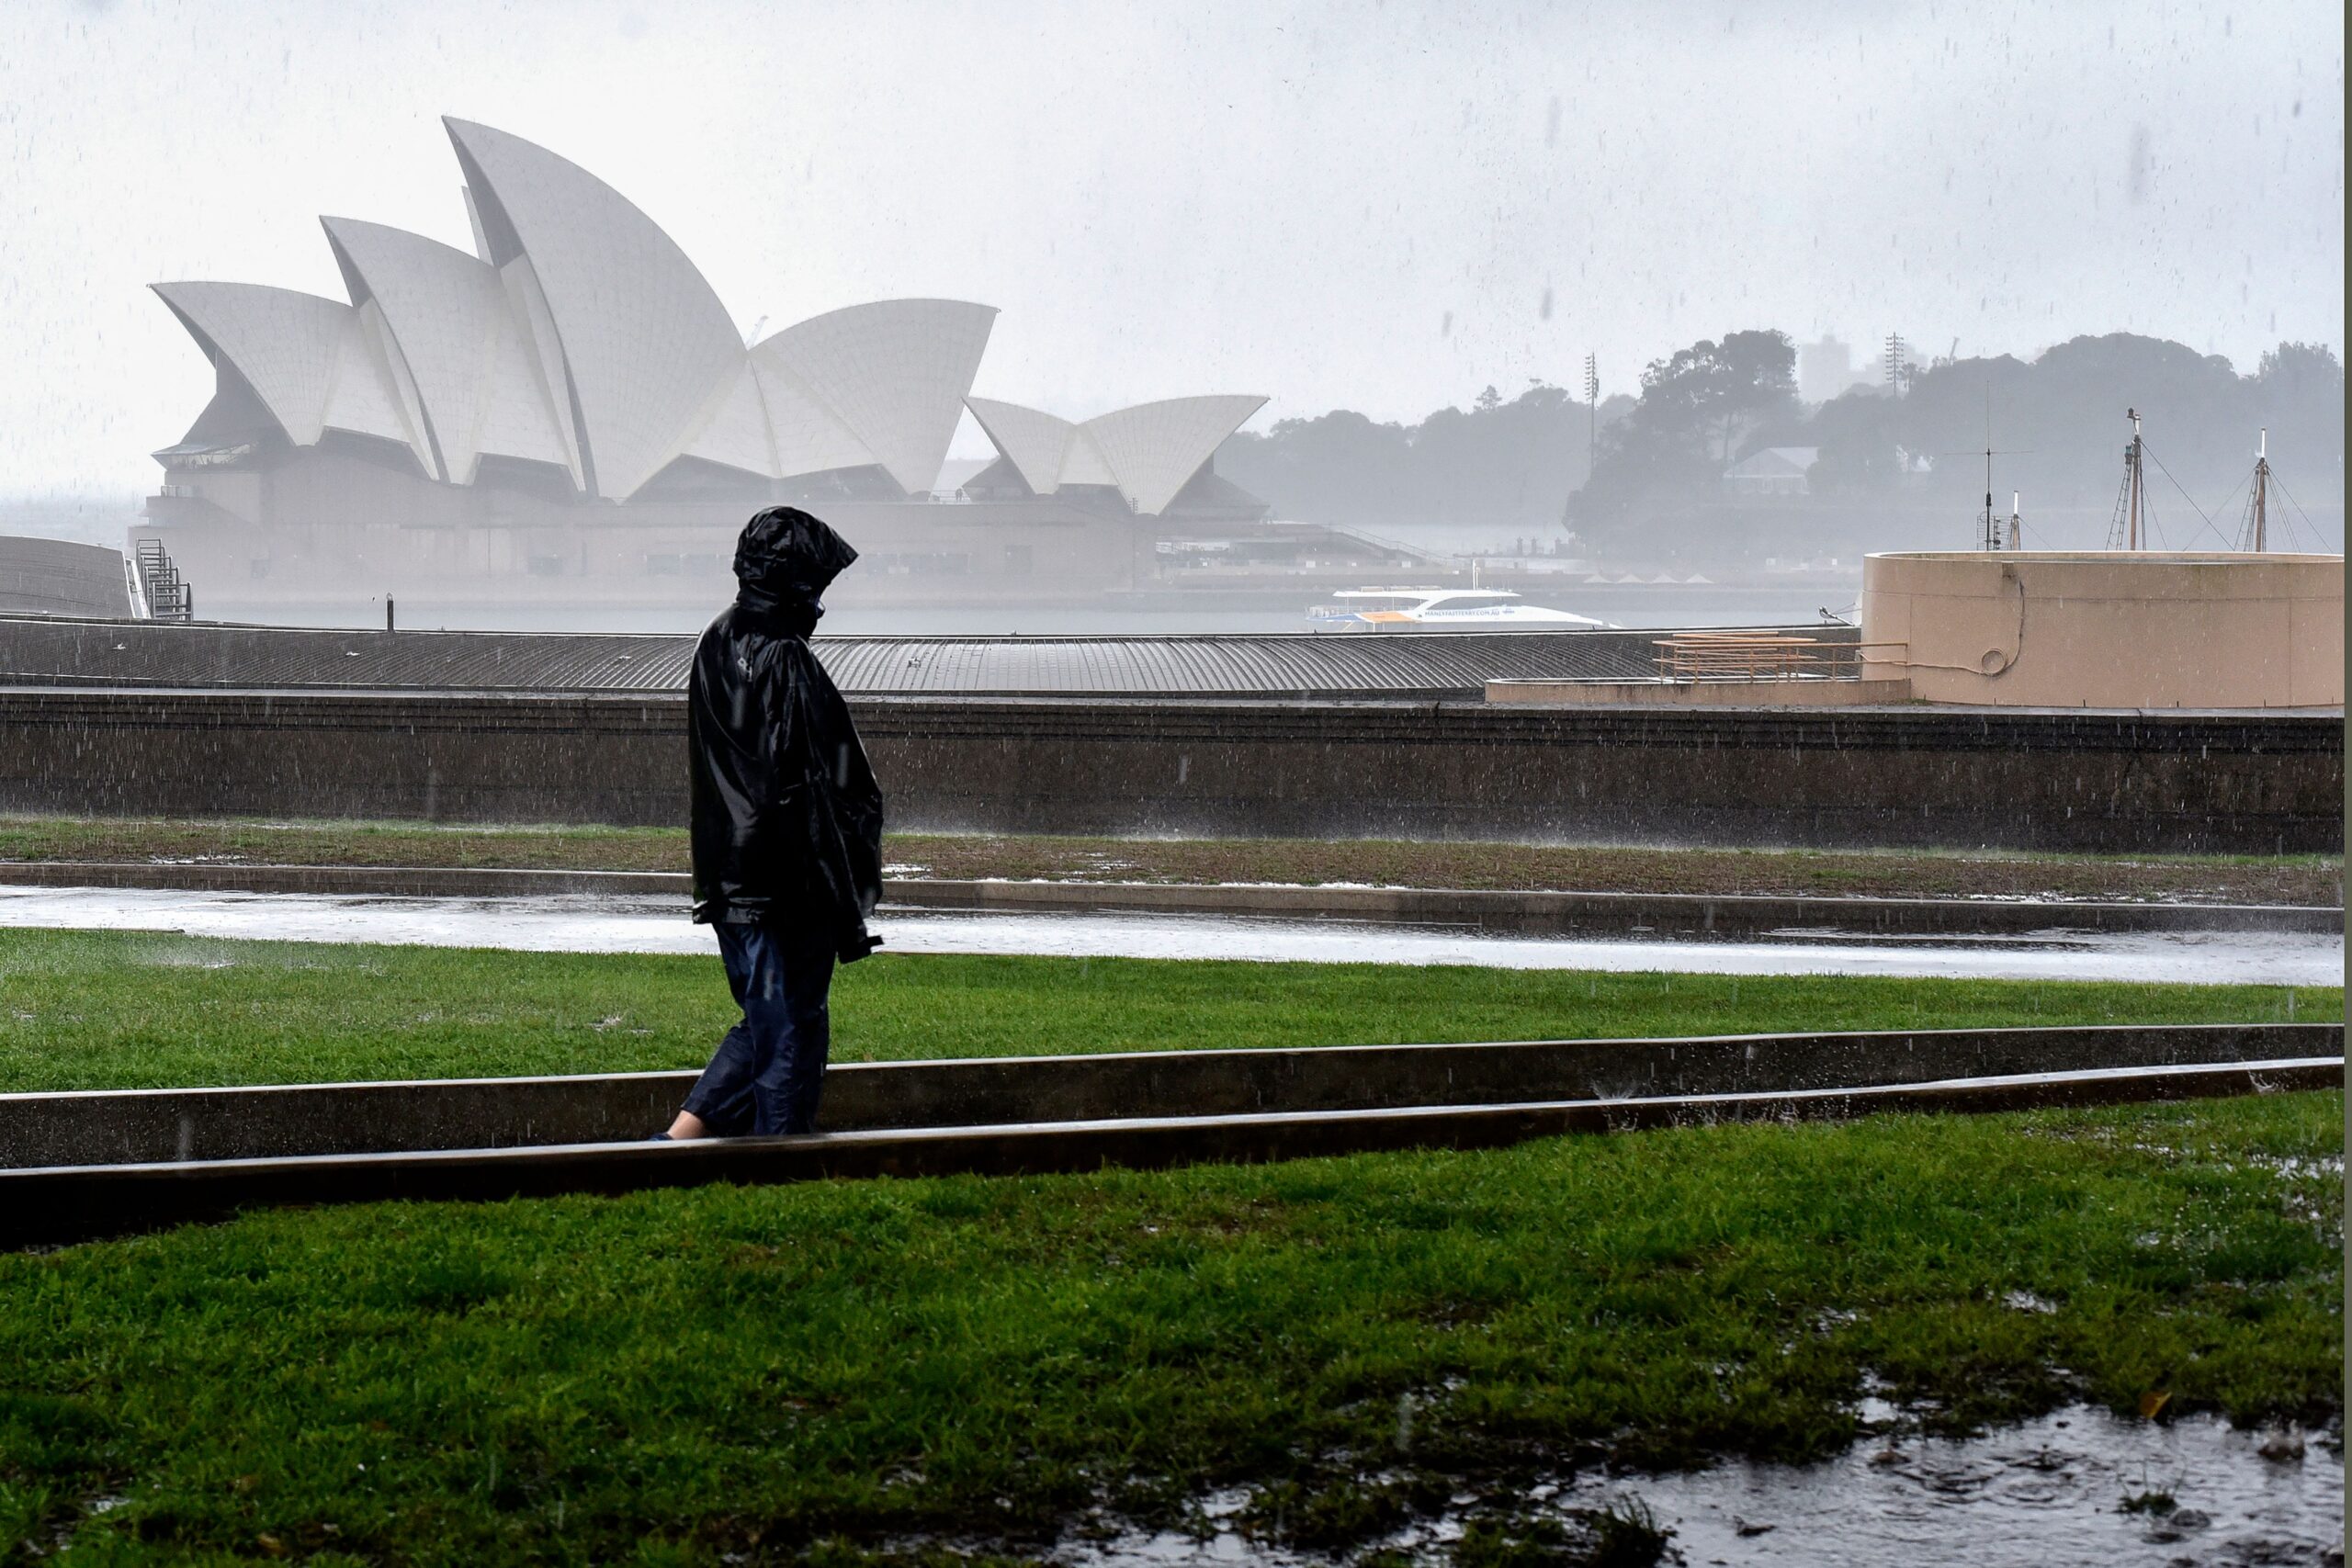 Rain pours down on the Sydney Opera House on October 6, 2022.